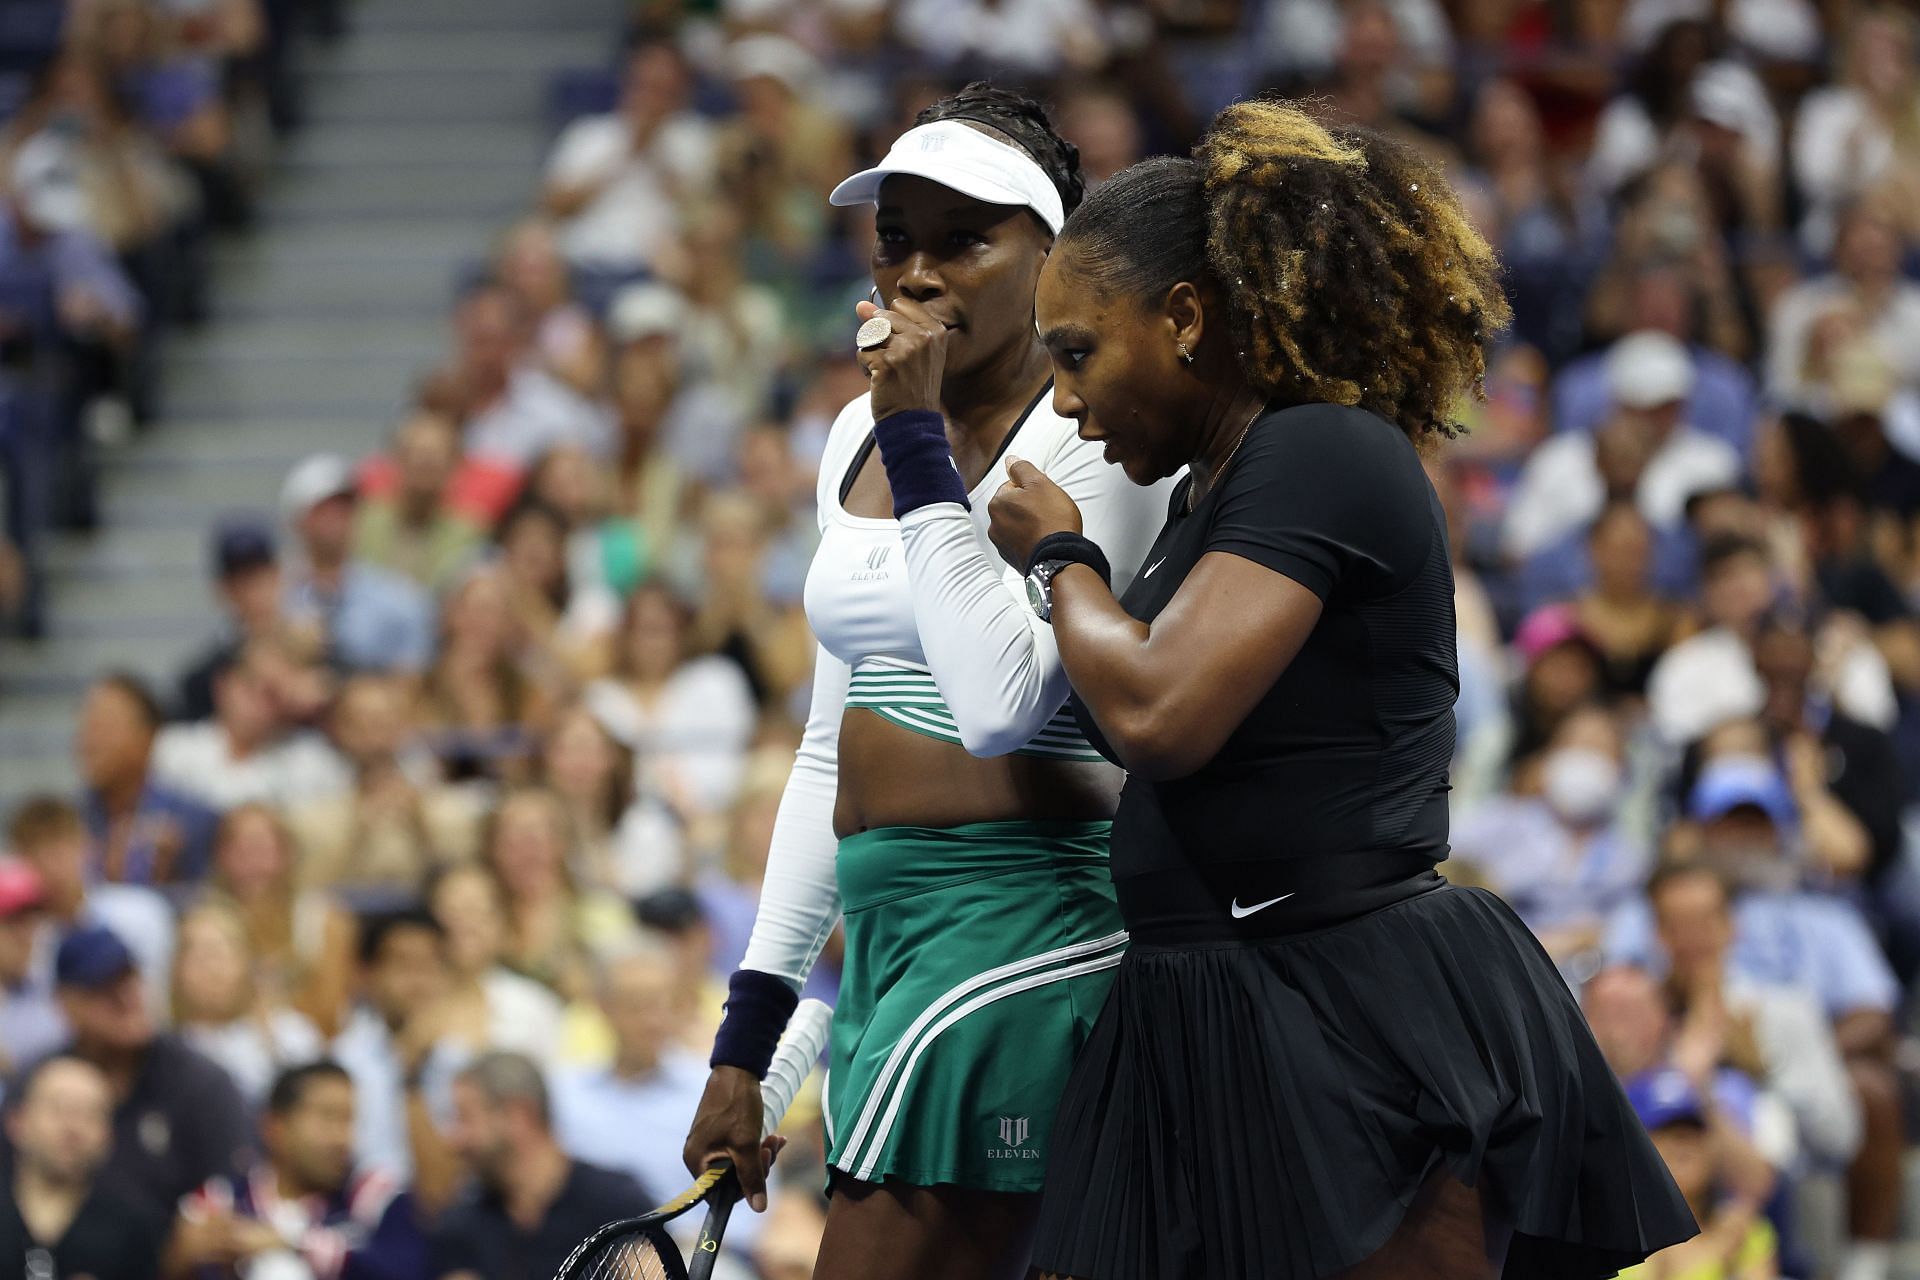 Venus and Serena Williams at the 2022 US Open.